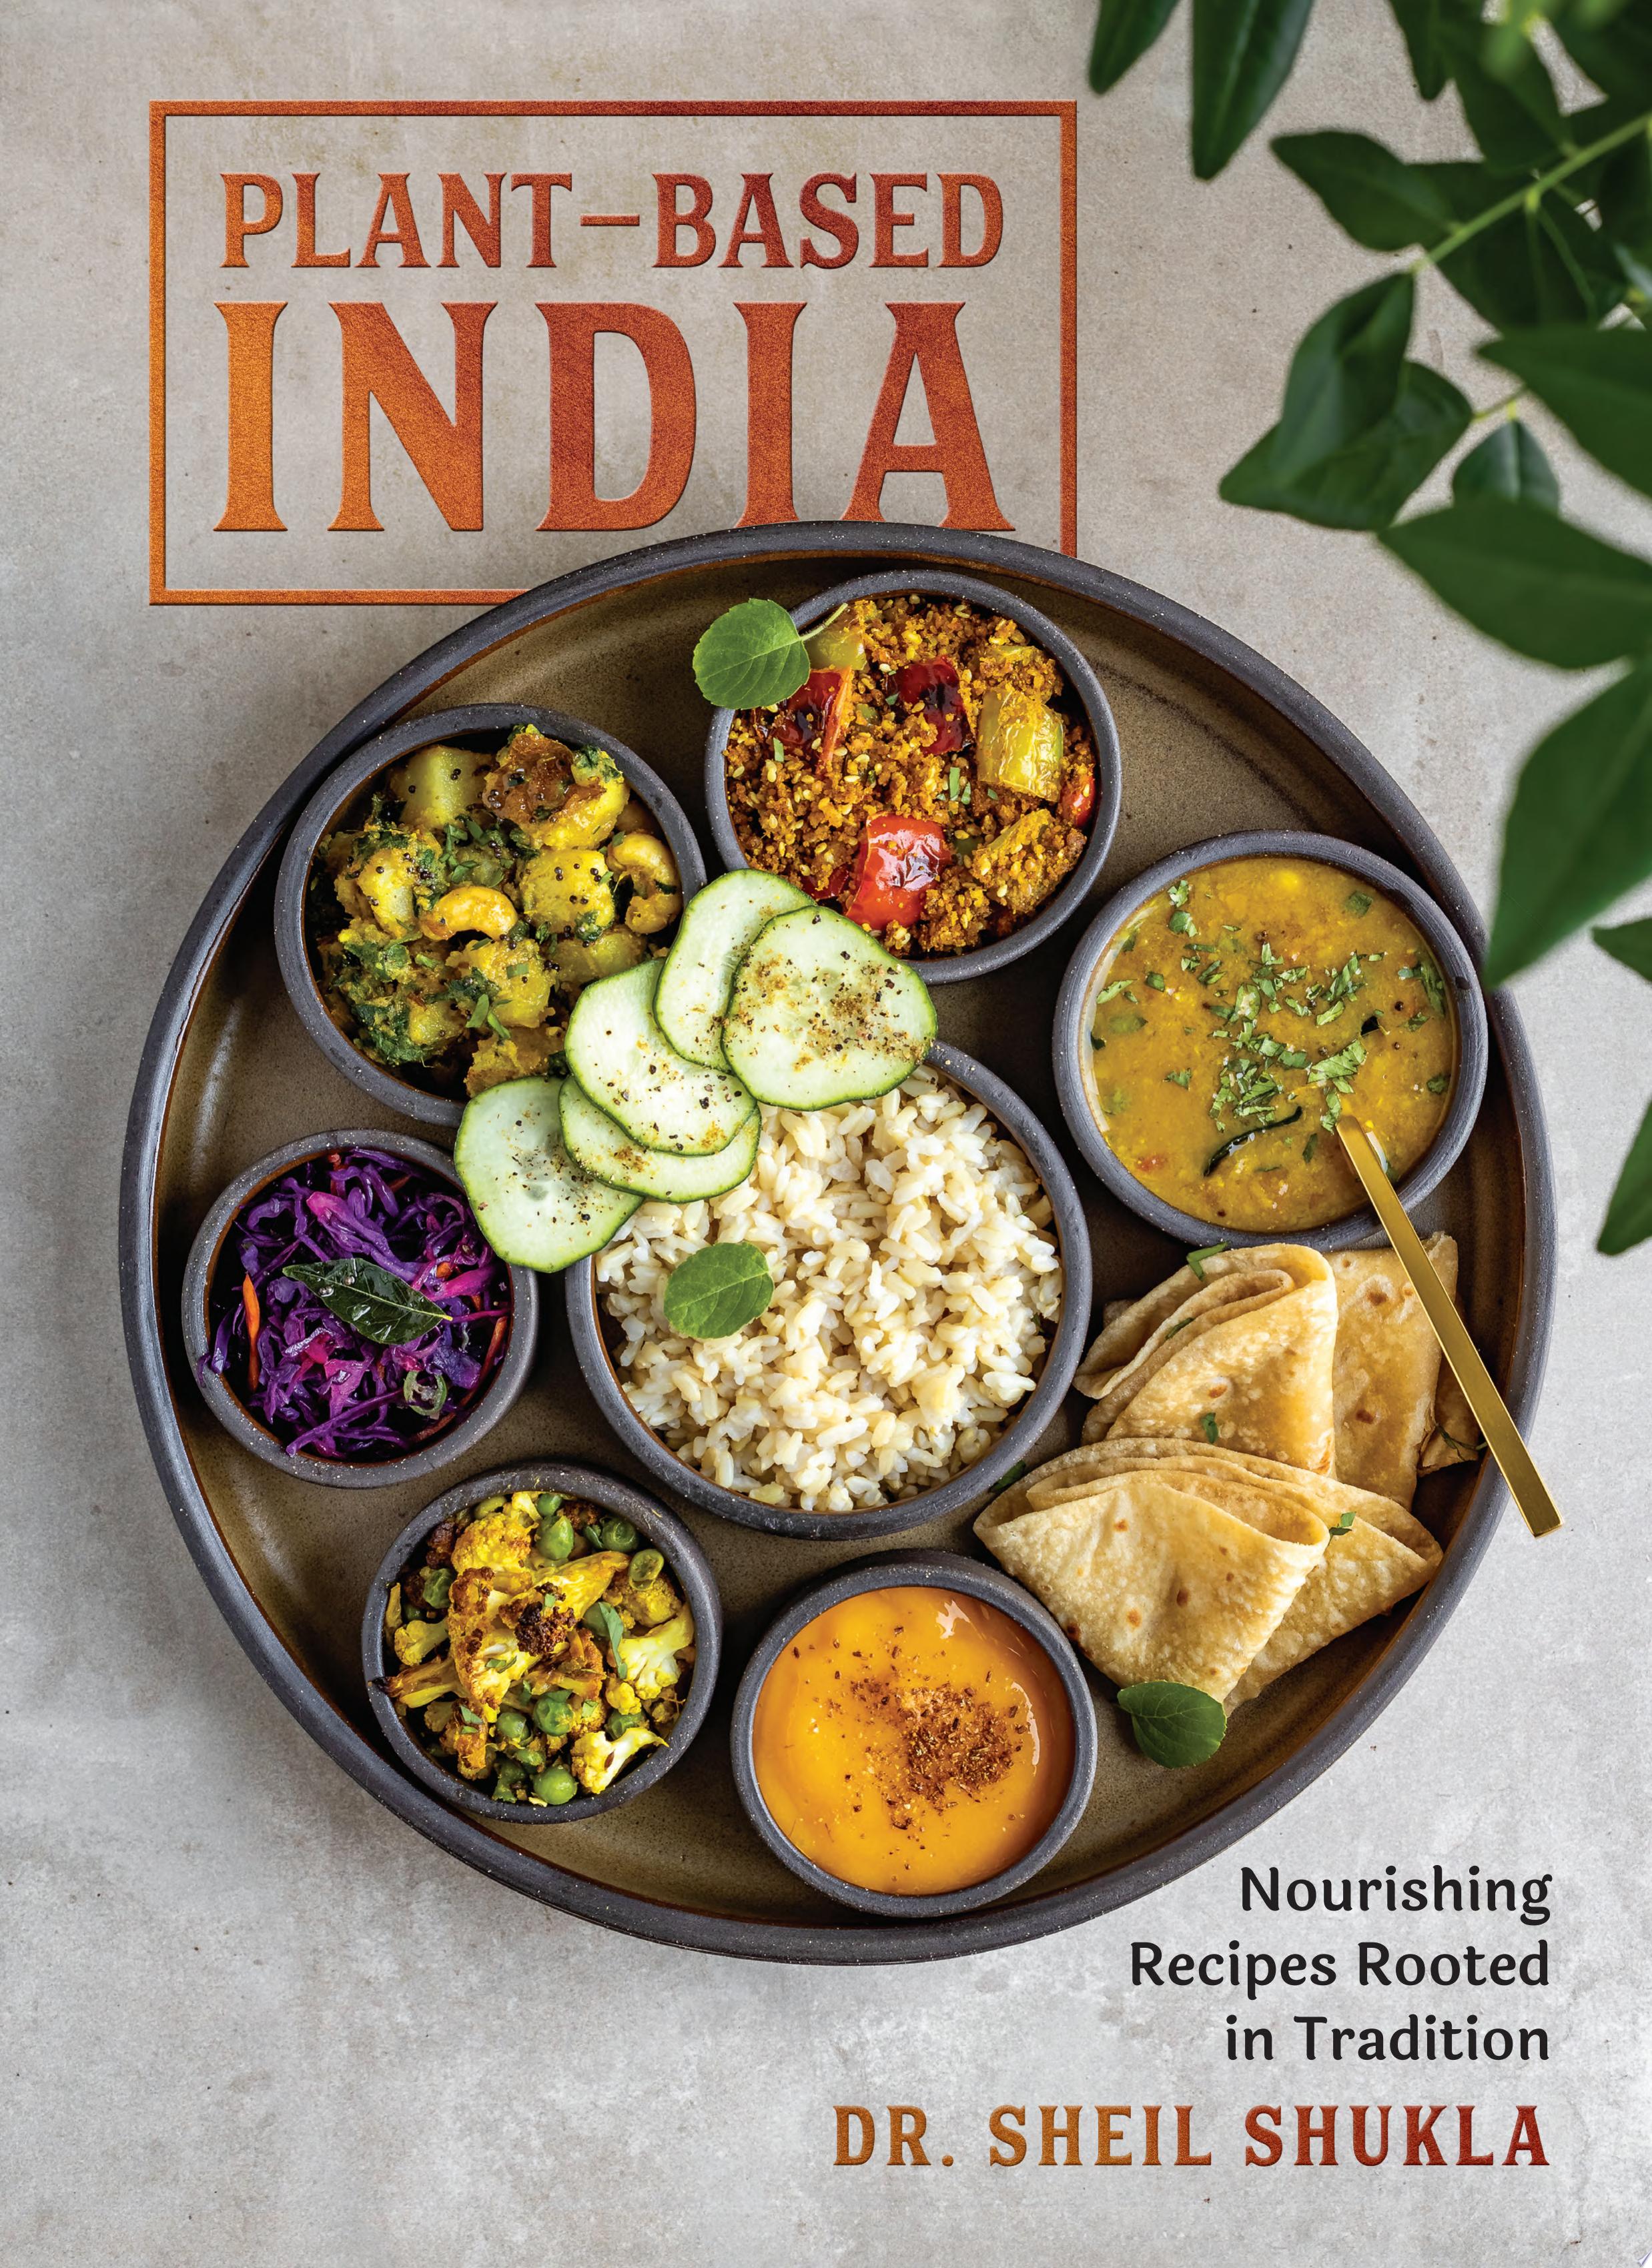 Image for "Plant-Based India"